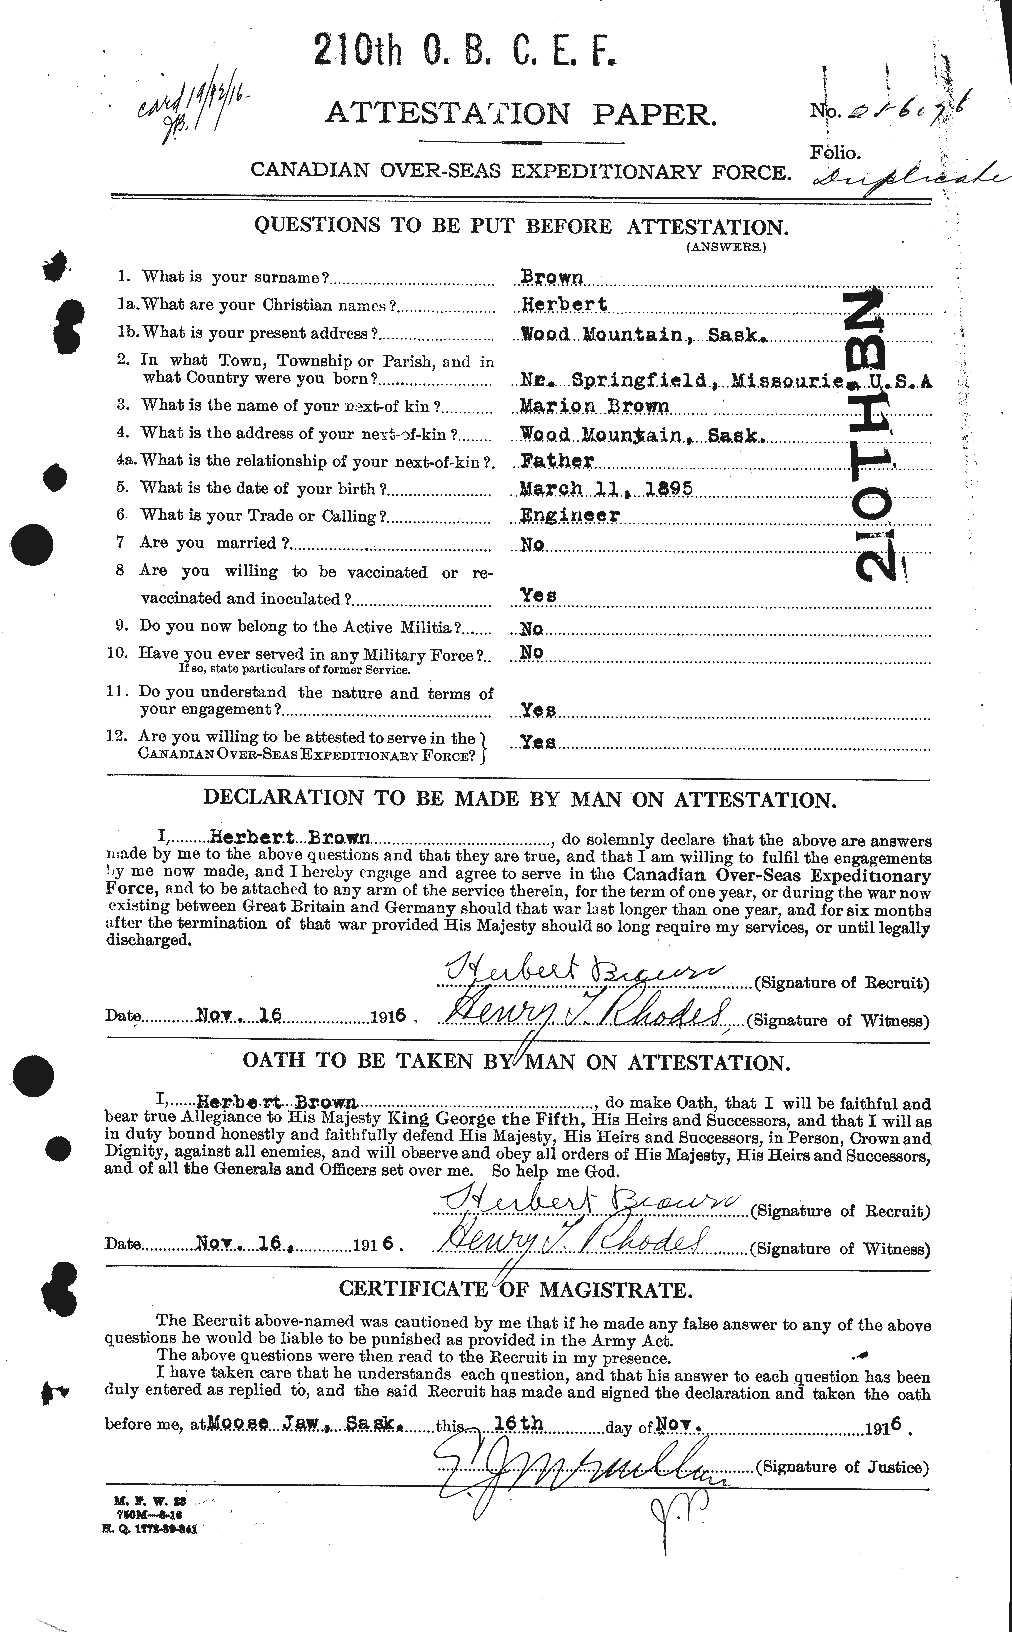 Personnel Records of the First World War - CEF 265552a